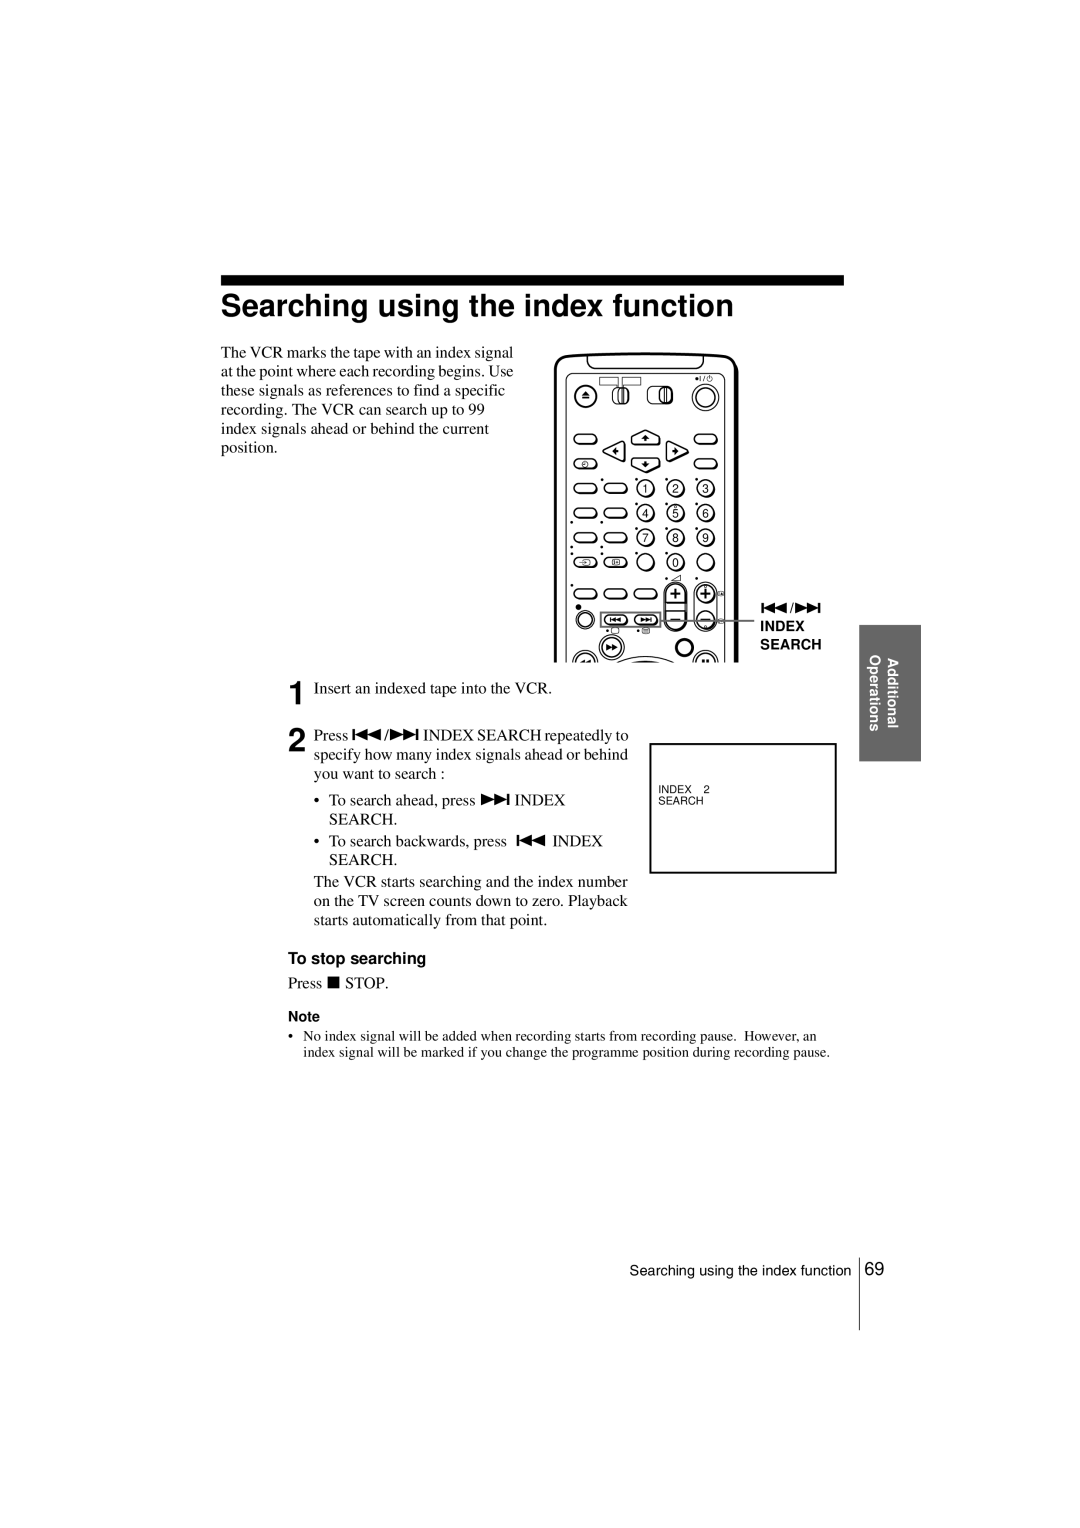 Sony SLV-SF990G manual Searching using the index function, To stop searching 